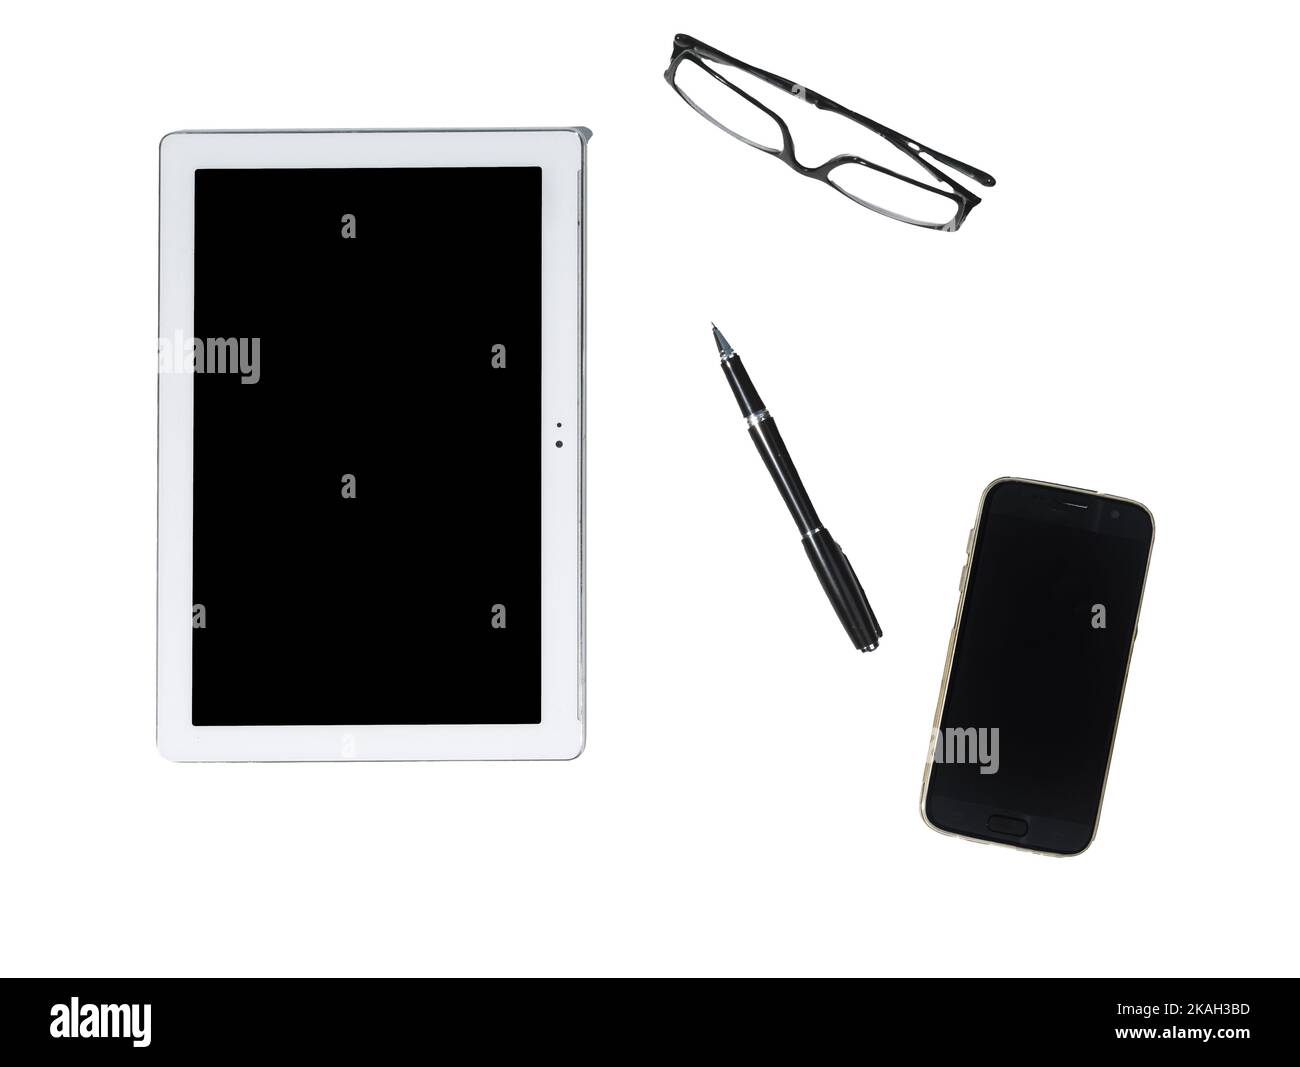 A tablet, a mobile phone and a pair of glasses on a transparent background Stock Photo